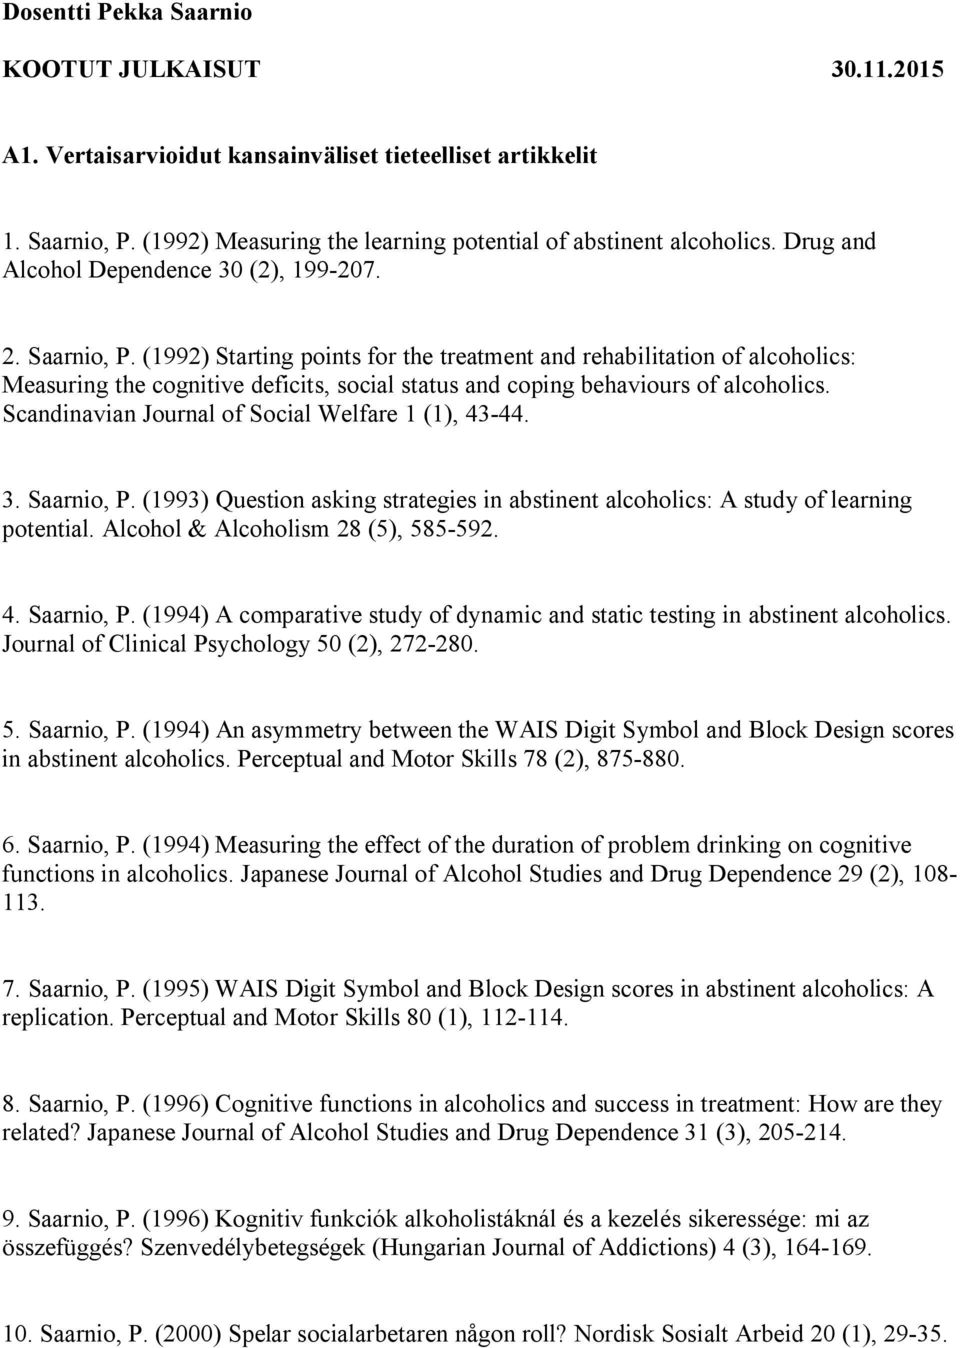 (1992) Starting points for the treatment and rehabilitation of alcoholics: Measuring the cognitive deficits, social status and coping behaviours of alcoholics.